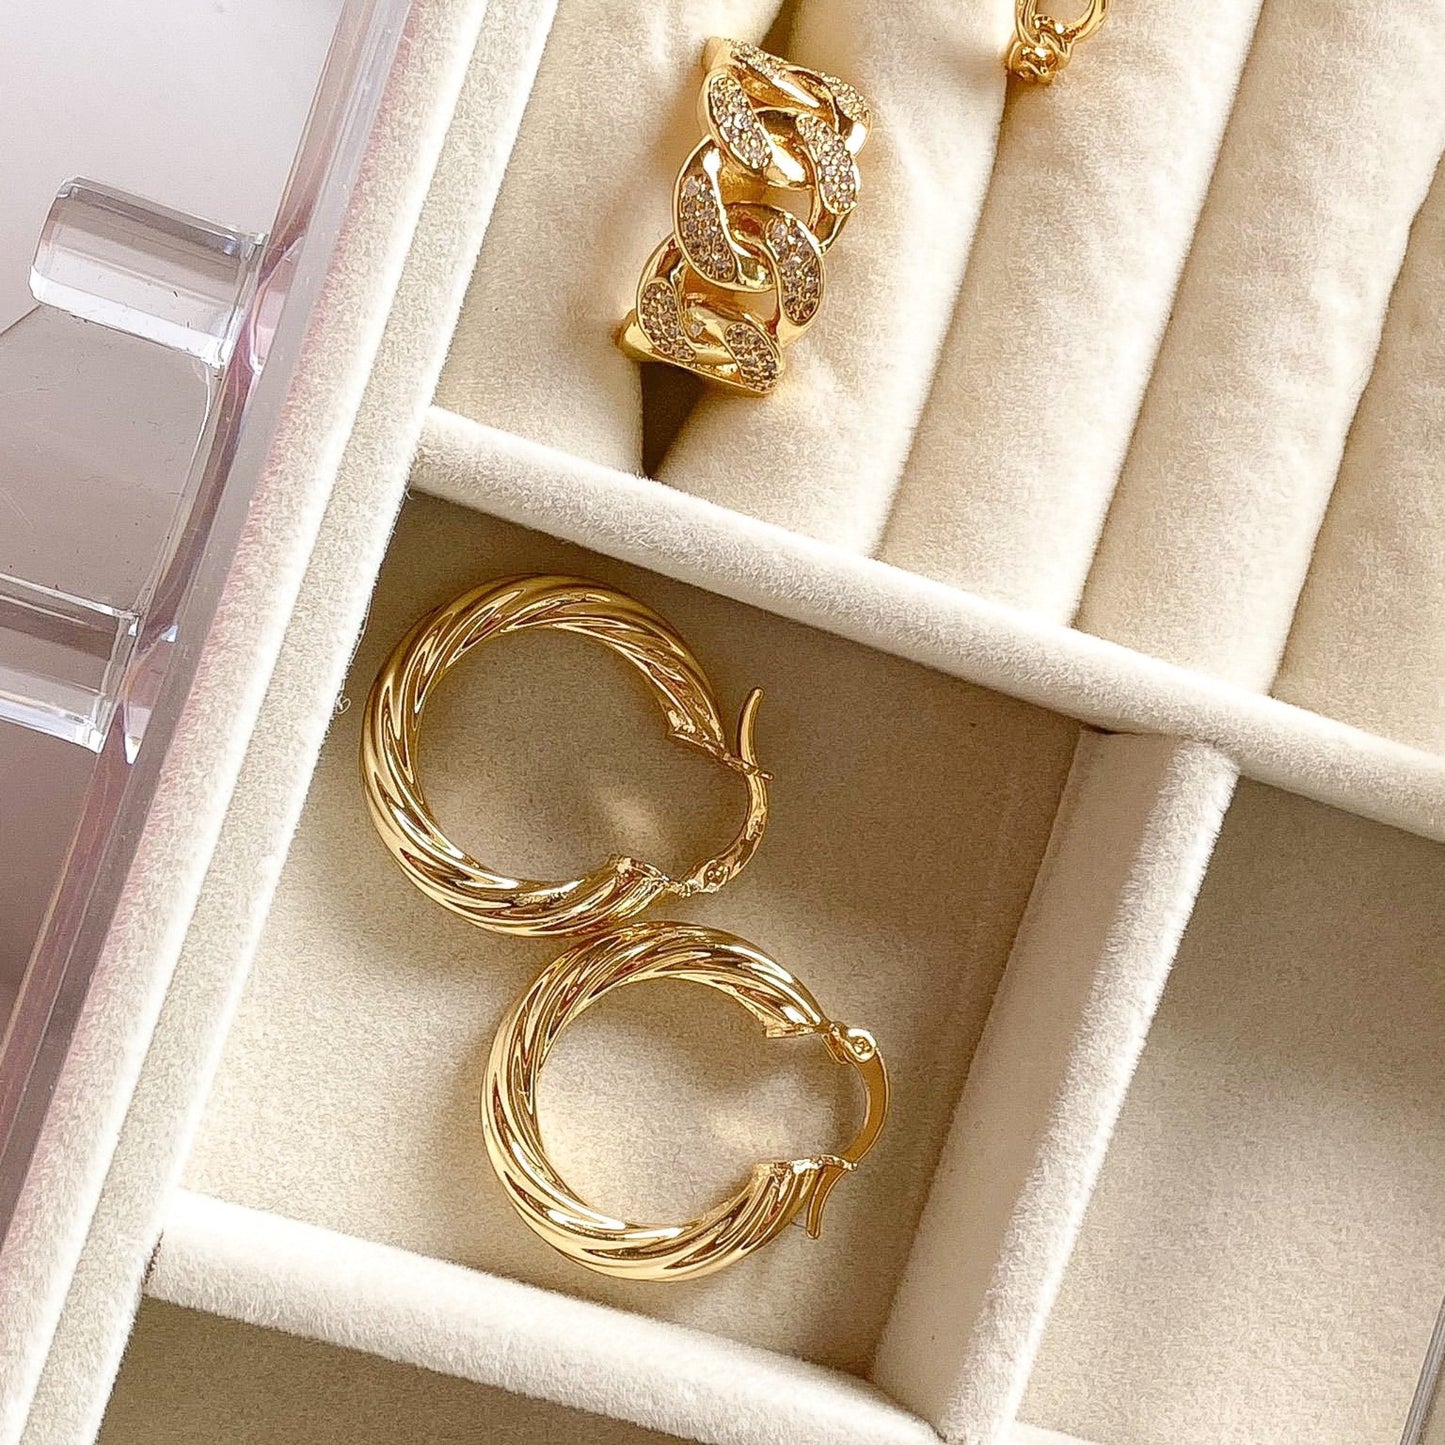 Rope gold-filled hoops by ISVI Boutique. Water-resistant earrings